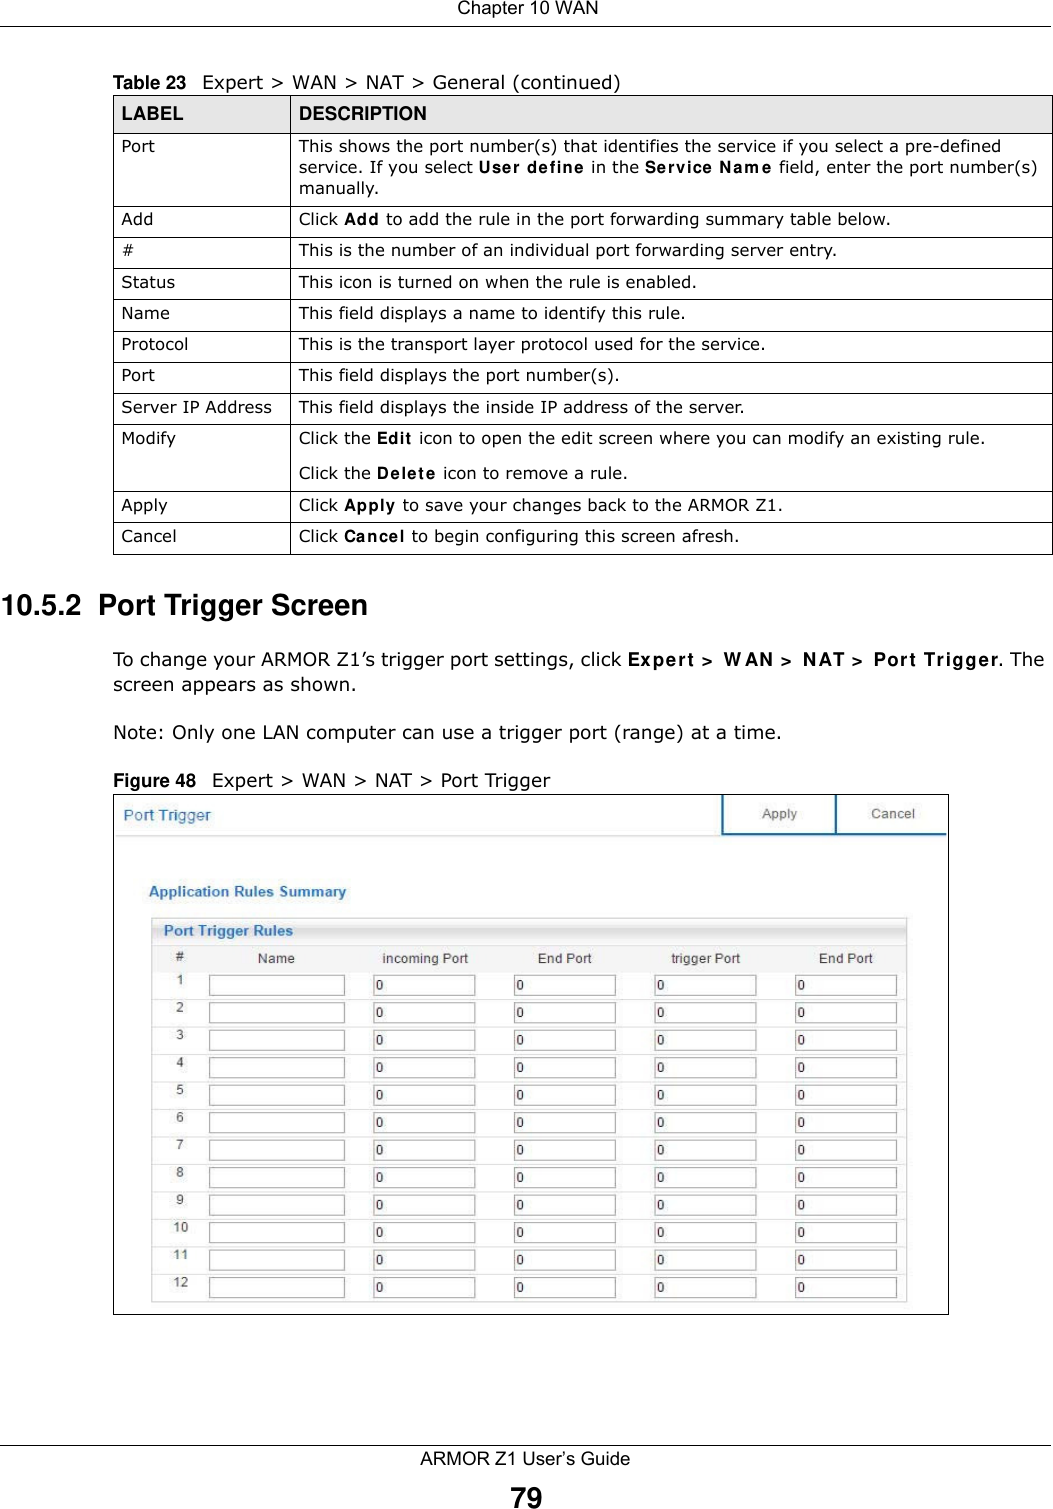  Chapter 10 WANARMOR Z1 User’s Guide7910.5.2  Port Trigger ScreenTo change your ARMOR Z1’s trigger port settings, click Expert &gt; WAN &gt; NAT &gt; Port Trigger. The screen appears as shown.Note: Only one LAN computer can use a trigger port (range) at a time.Figure 48   Expert &gt; WAN &gt; NAT &gt; Port TriggerPort This shows the port number(s) that identifies the service if you select a pre-defined service. If you select User define in the Service Name field, enter the port number(s) manually.Add Click Add to add the rule in the port forwarding summary table below.#This is the number of an individual port forwarding server entry.Status This icon is turned on when the rule is enabled. Name This field displays a name to identify this rule.Protocol This is the transport layer protocol used for the service.Port This field displays the port number(s). Server IP Address This field displays the inside IP address of the server.Modify Click the Edit icon to open the edit screen where you can modify an existing rule. Click the Delete icon to remove a rule.Apply Click Apply to save your changes back to the ARMOR Z1.Cancel Click Cancel to begin configuring this screen afresh.Table 23   Expert &gt; WAN &gt; NAT &gt; General (continued)LABEL DESCRIPTION